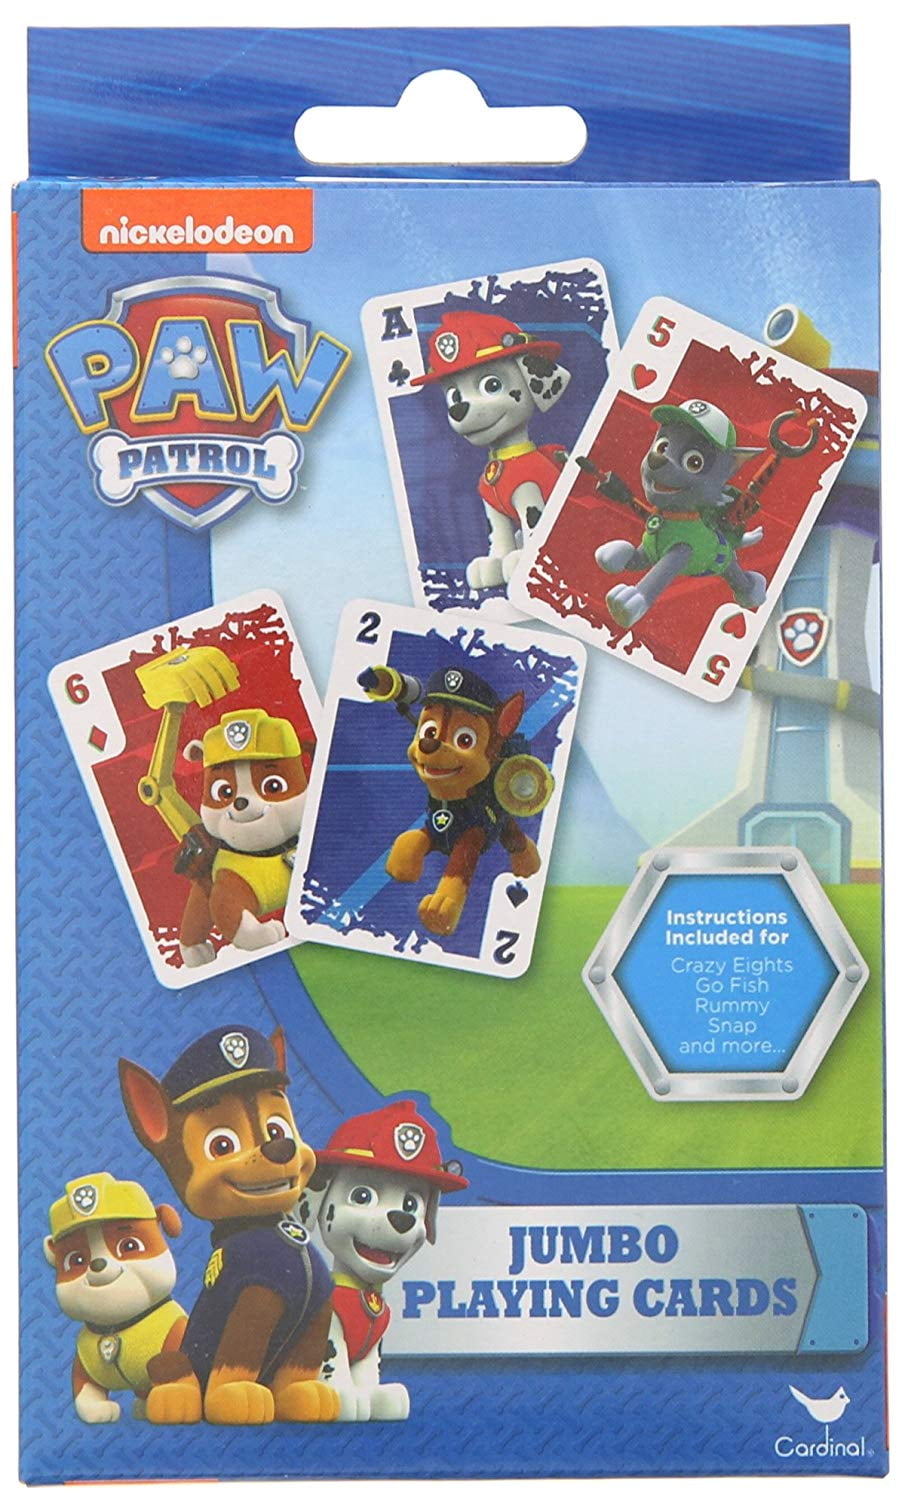 Nickelodeon PAW Patrol JUMBO Playing Cards Games w/Instructions NEW! 